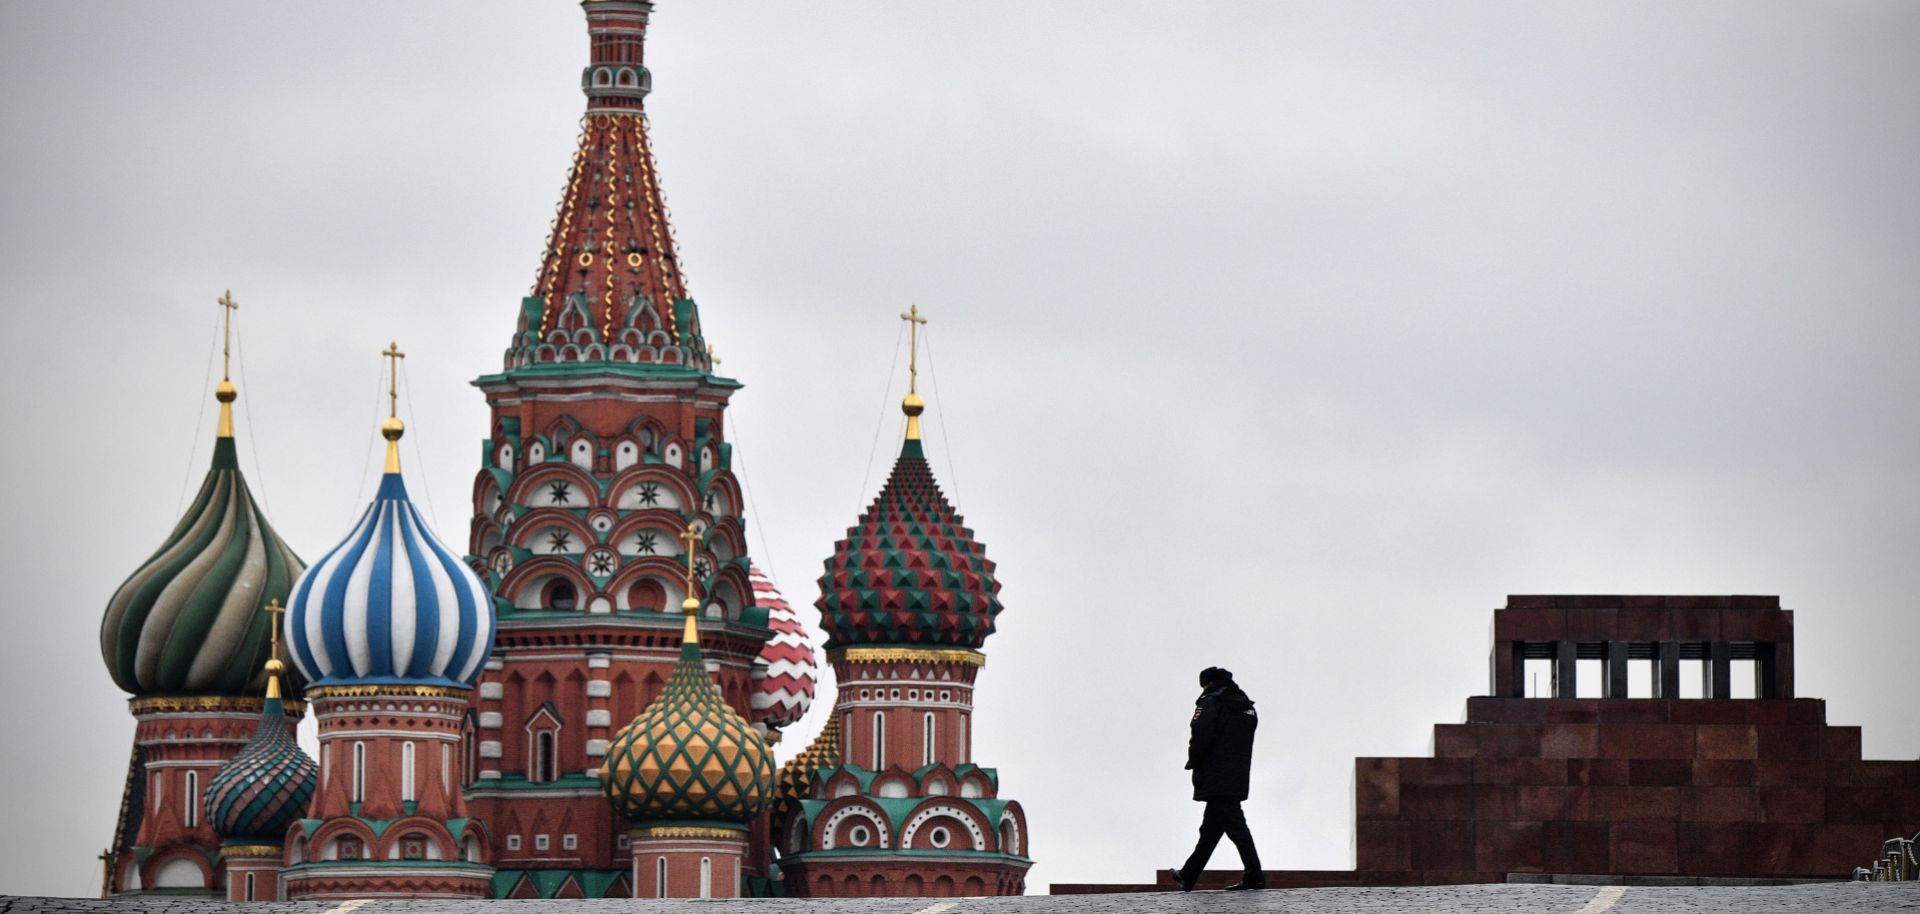 A Russian policeman walks in Red Square in Moscow on Nov. 5, 2017, with the Lenin Mausoleum and St. Basil's Cathedral in the background.